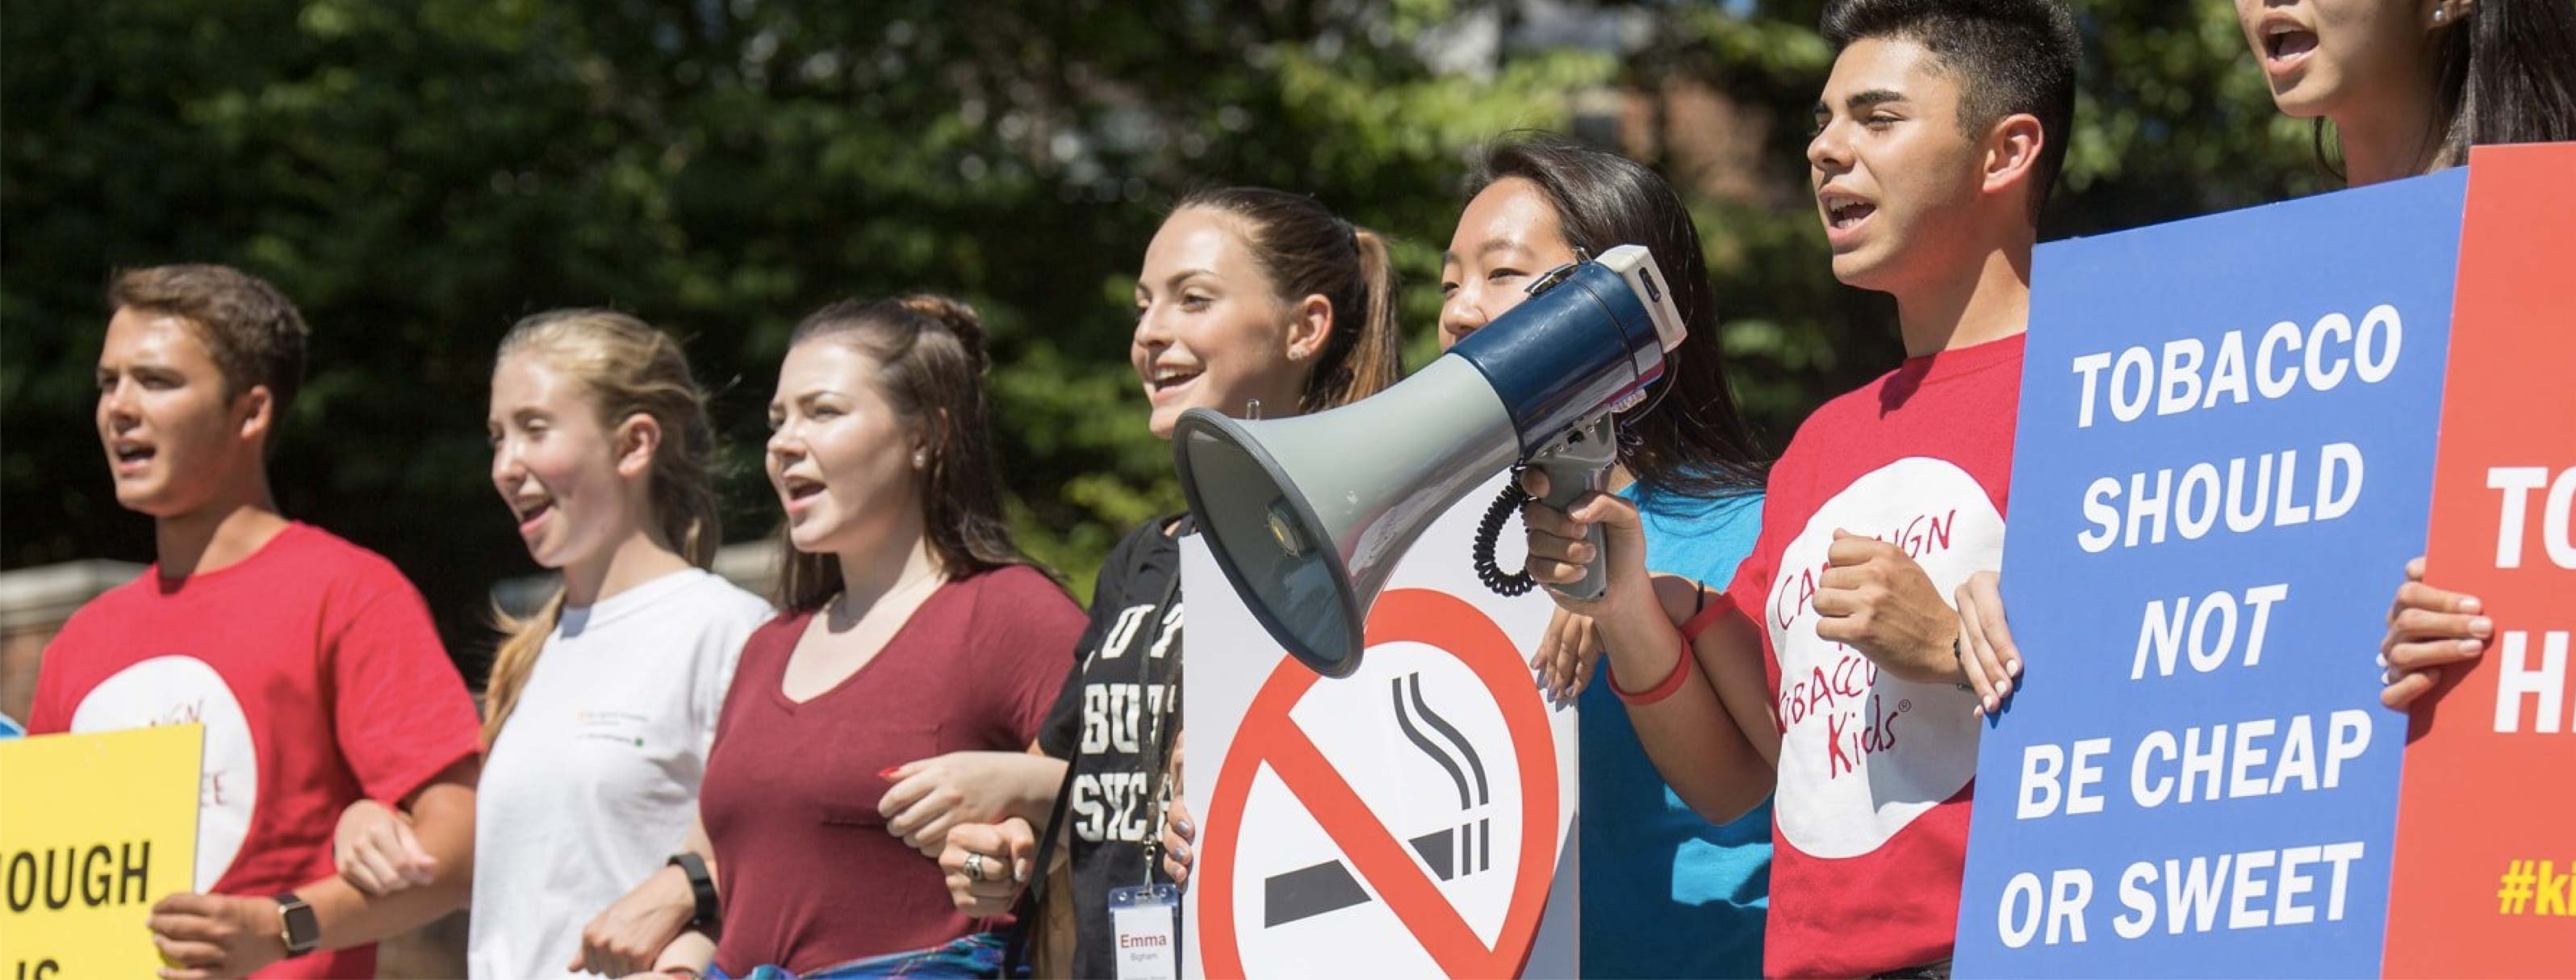 A group of teenagers advocating for change